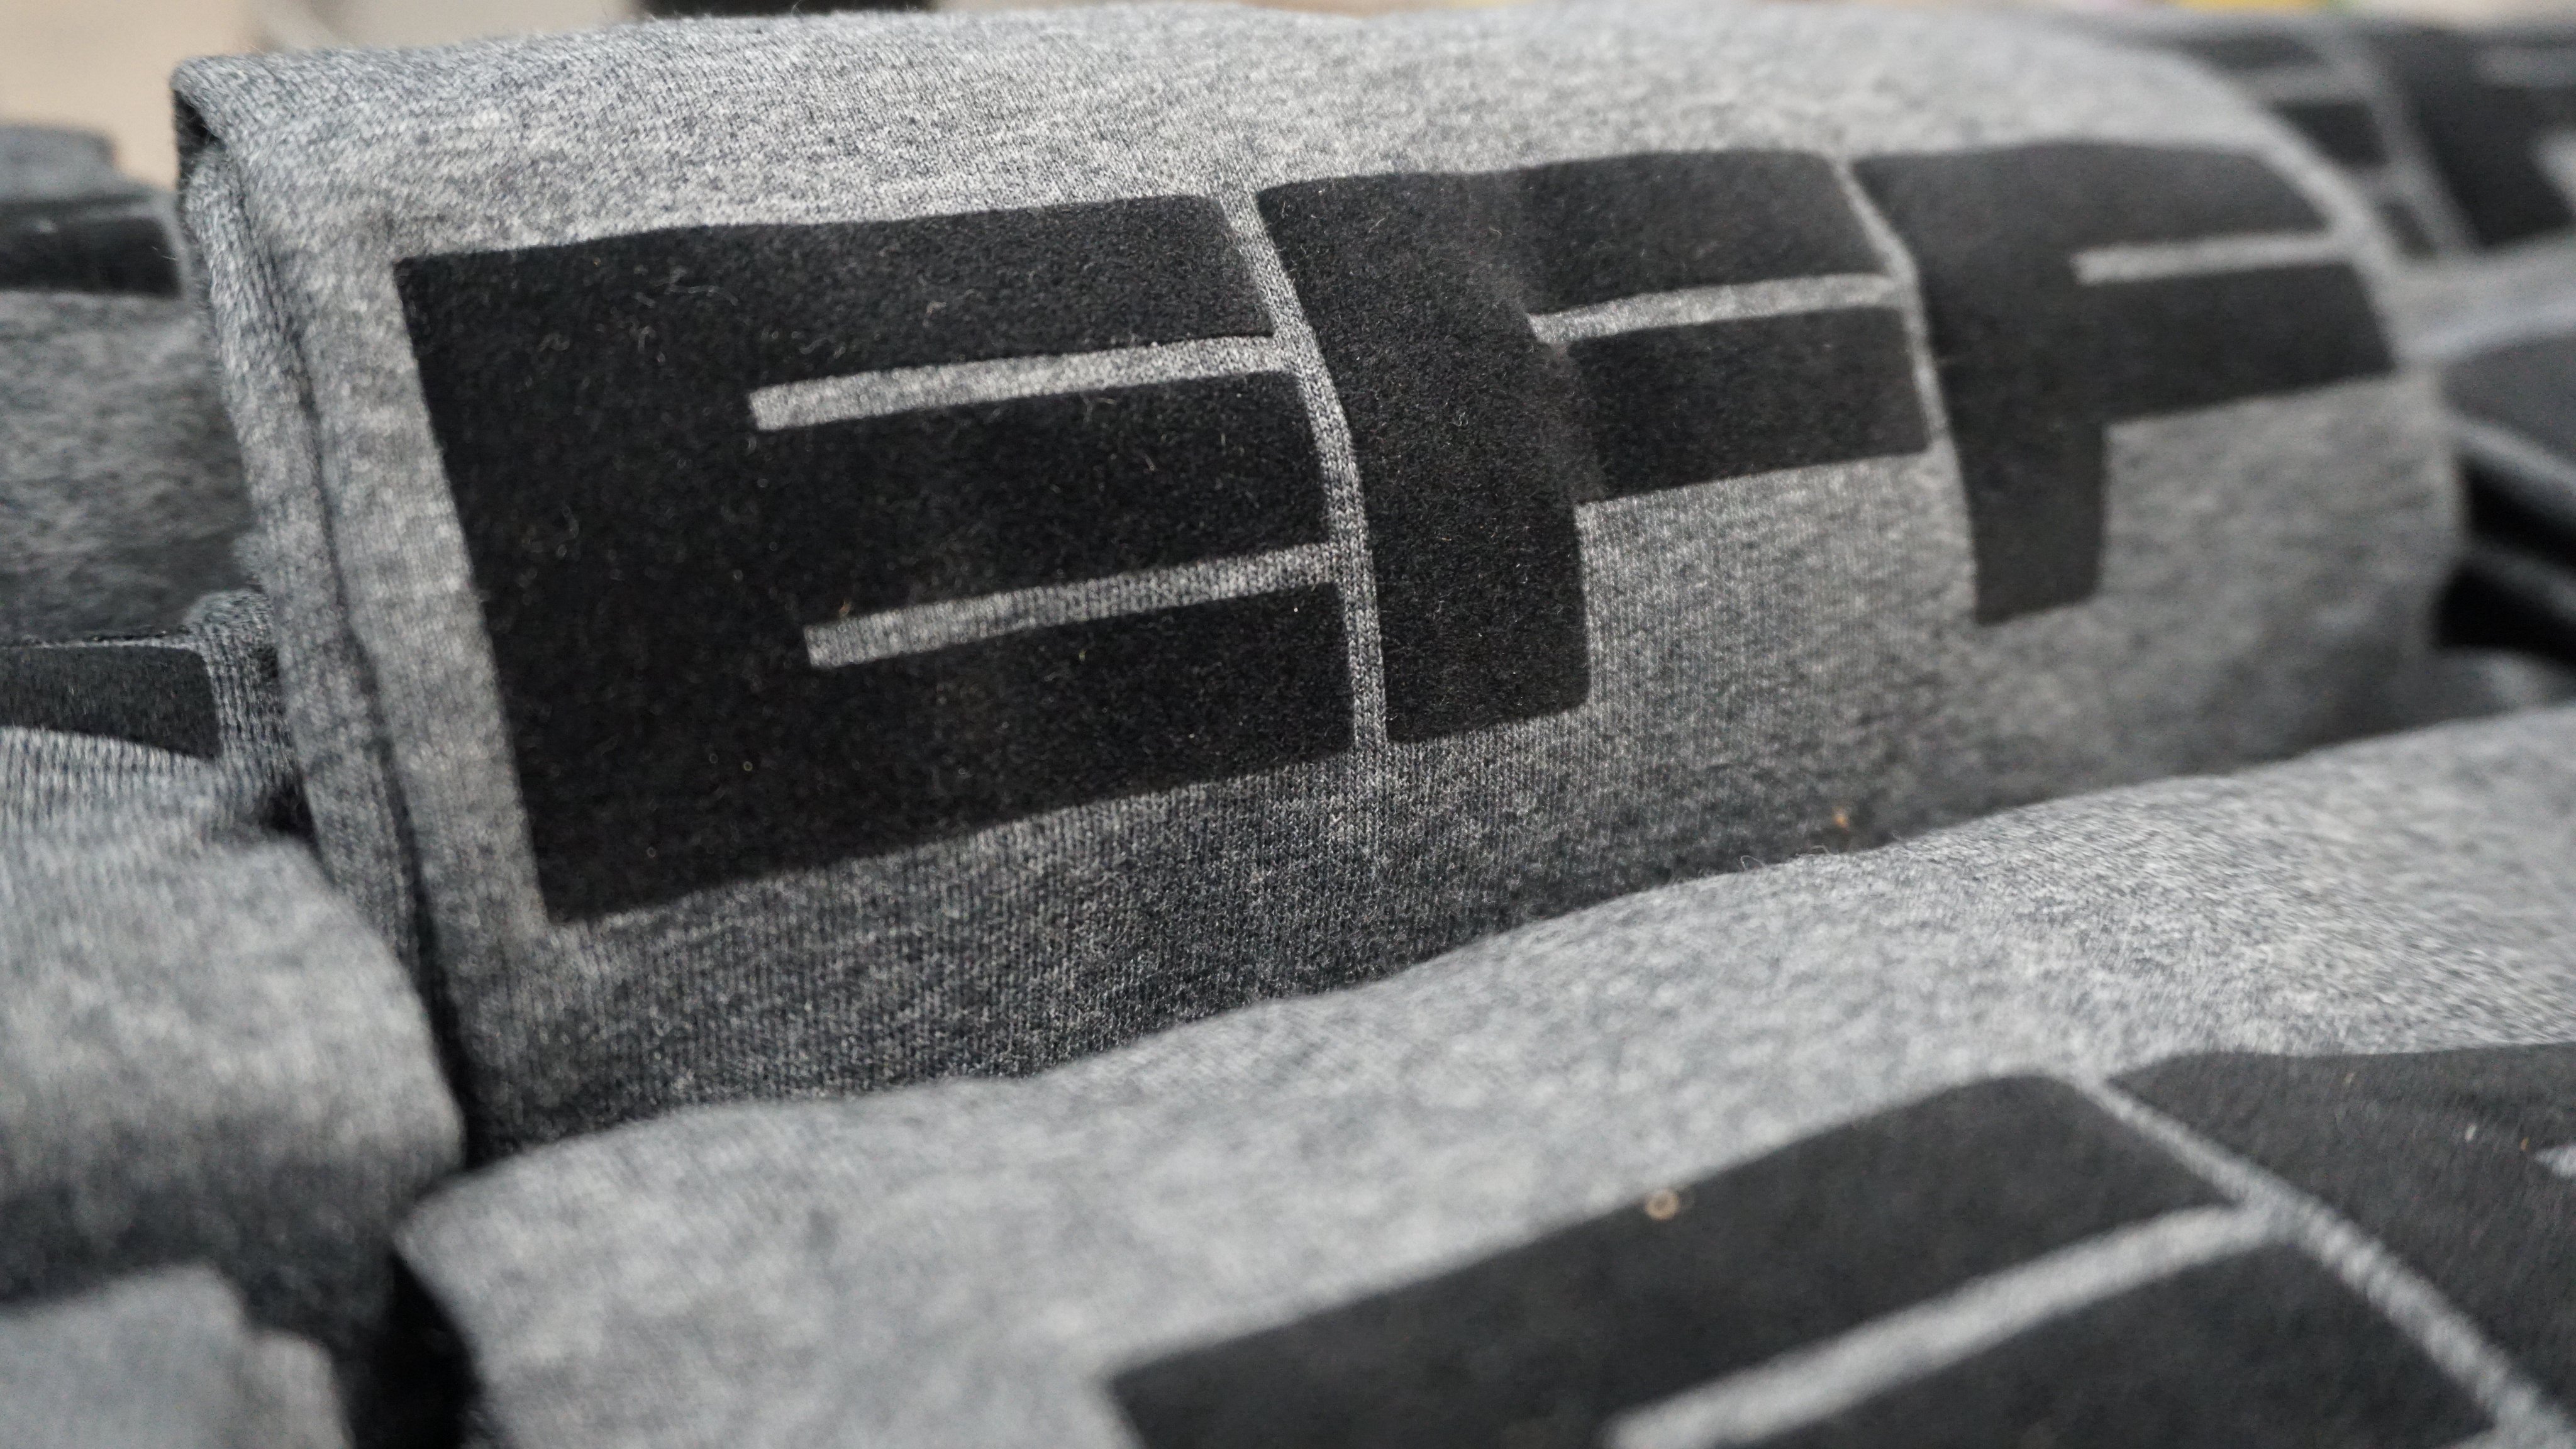 EFF's new Fuzzy Monogram t-shirt. A grey heather shirt with black EFF logo on the front.